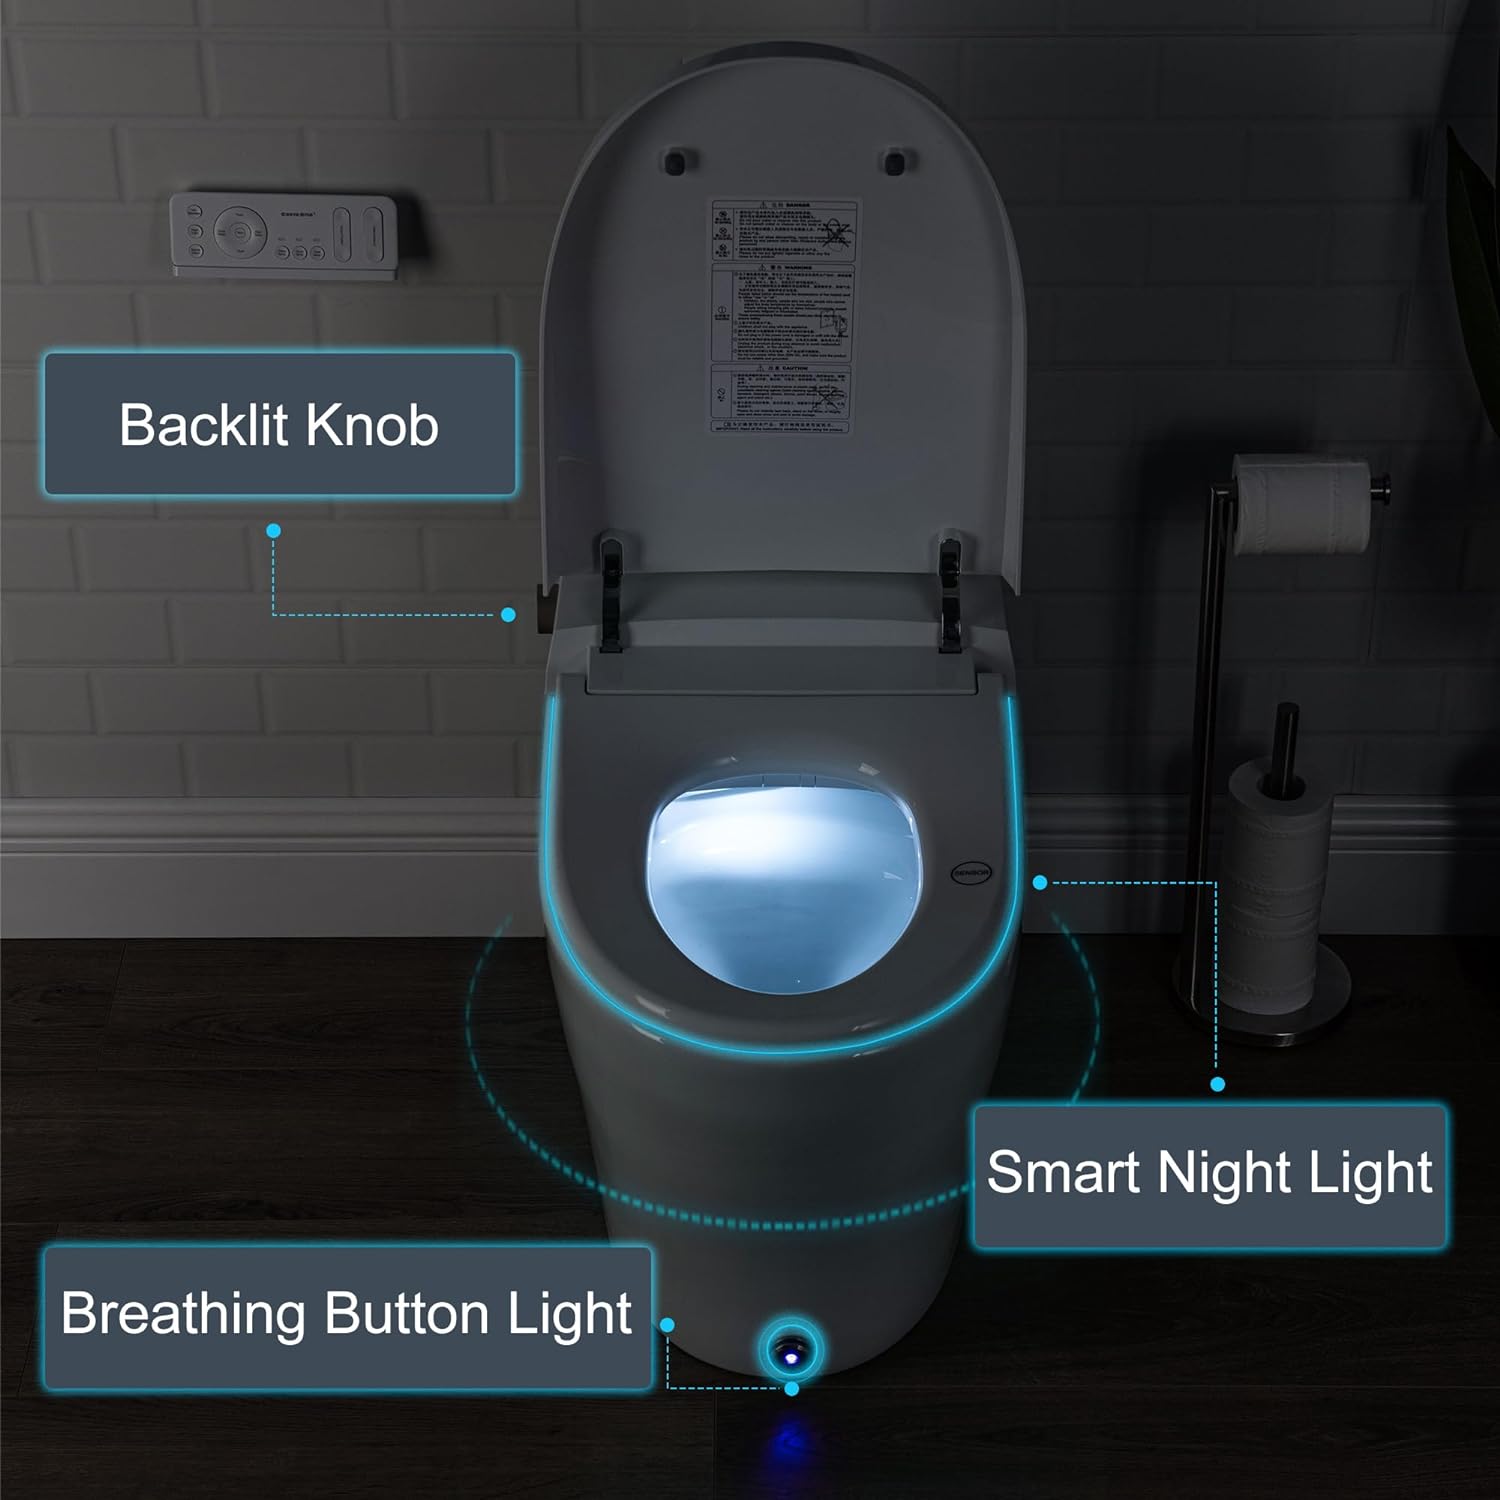 Smart Toilets Can Be Flushed Even During Power Outages CDY070-Arrisea